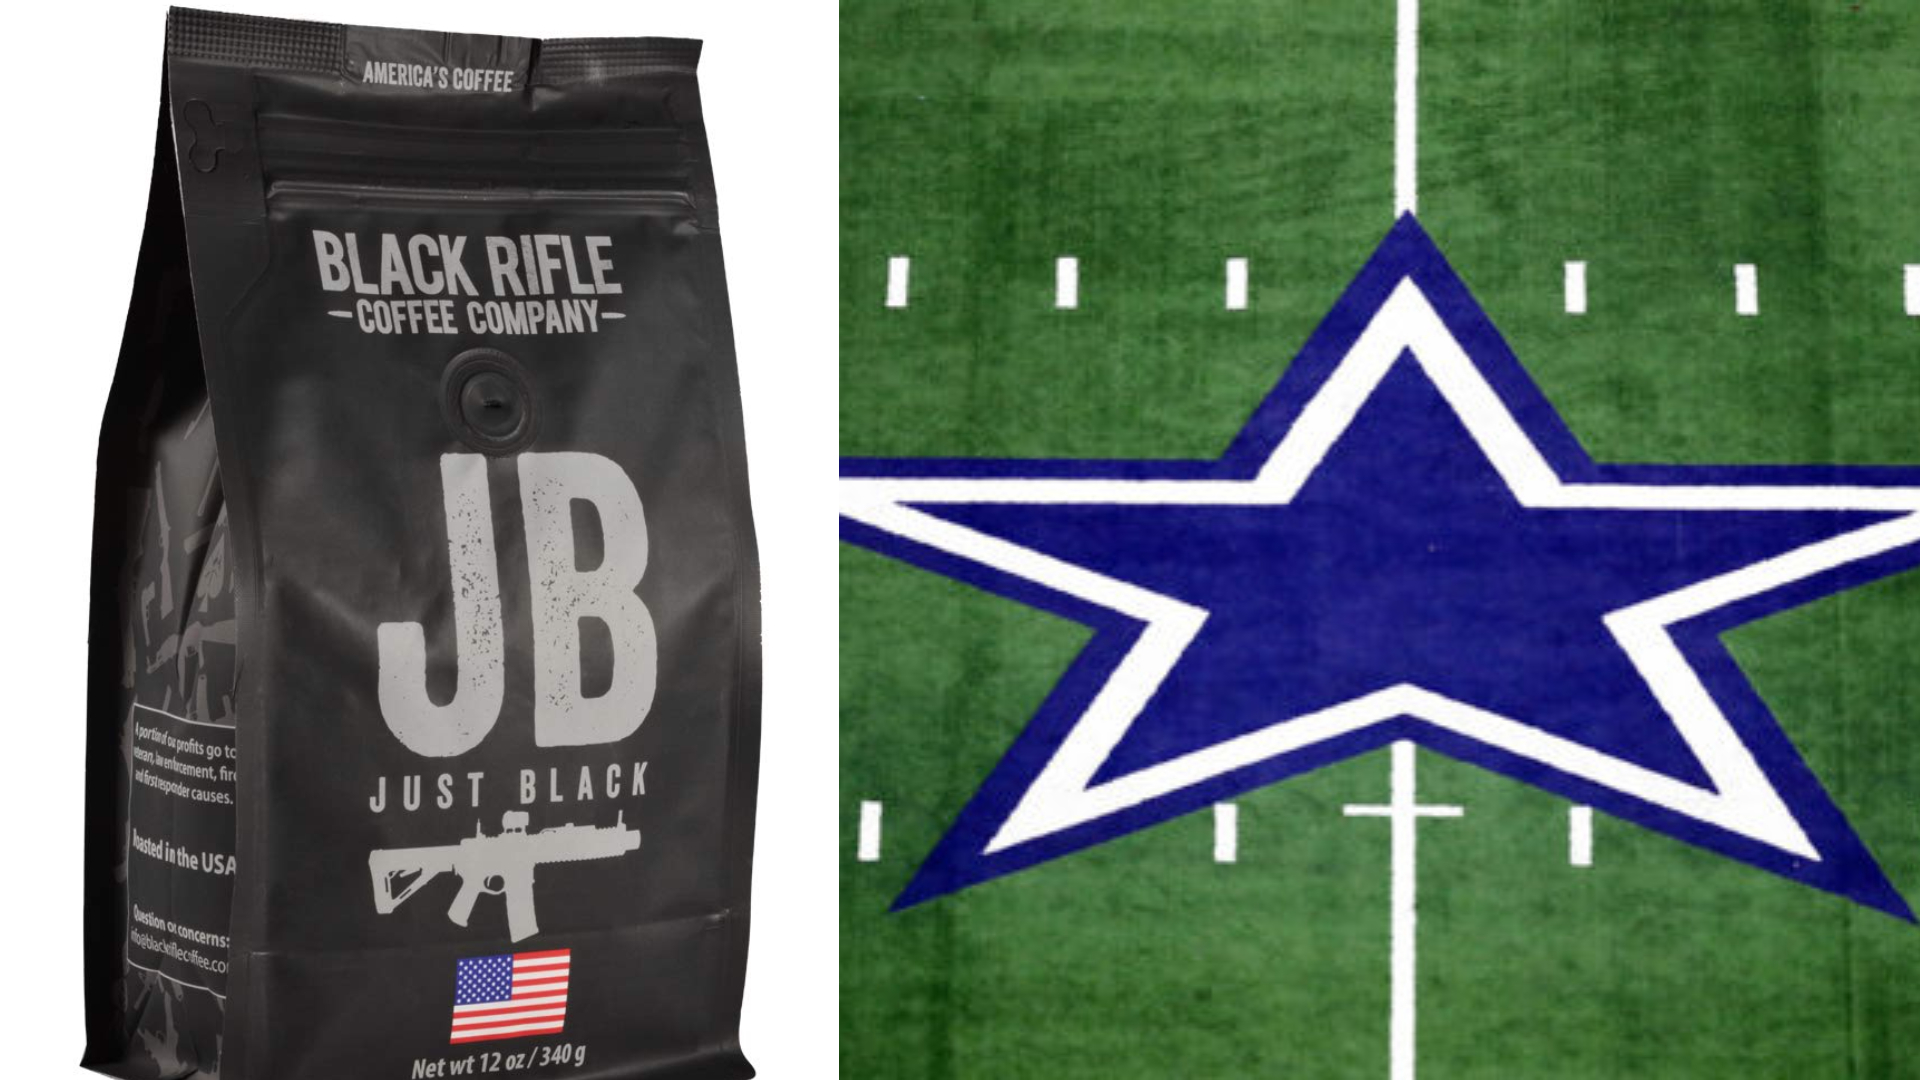 Cowboys criticized over deal with gun-themed coffee company